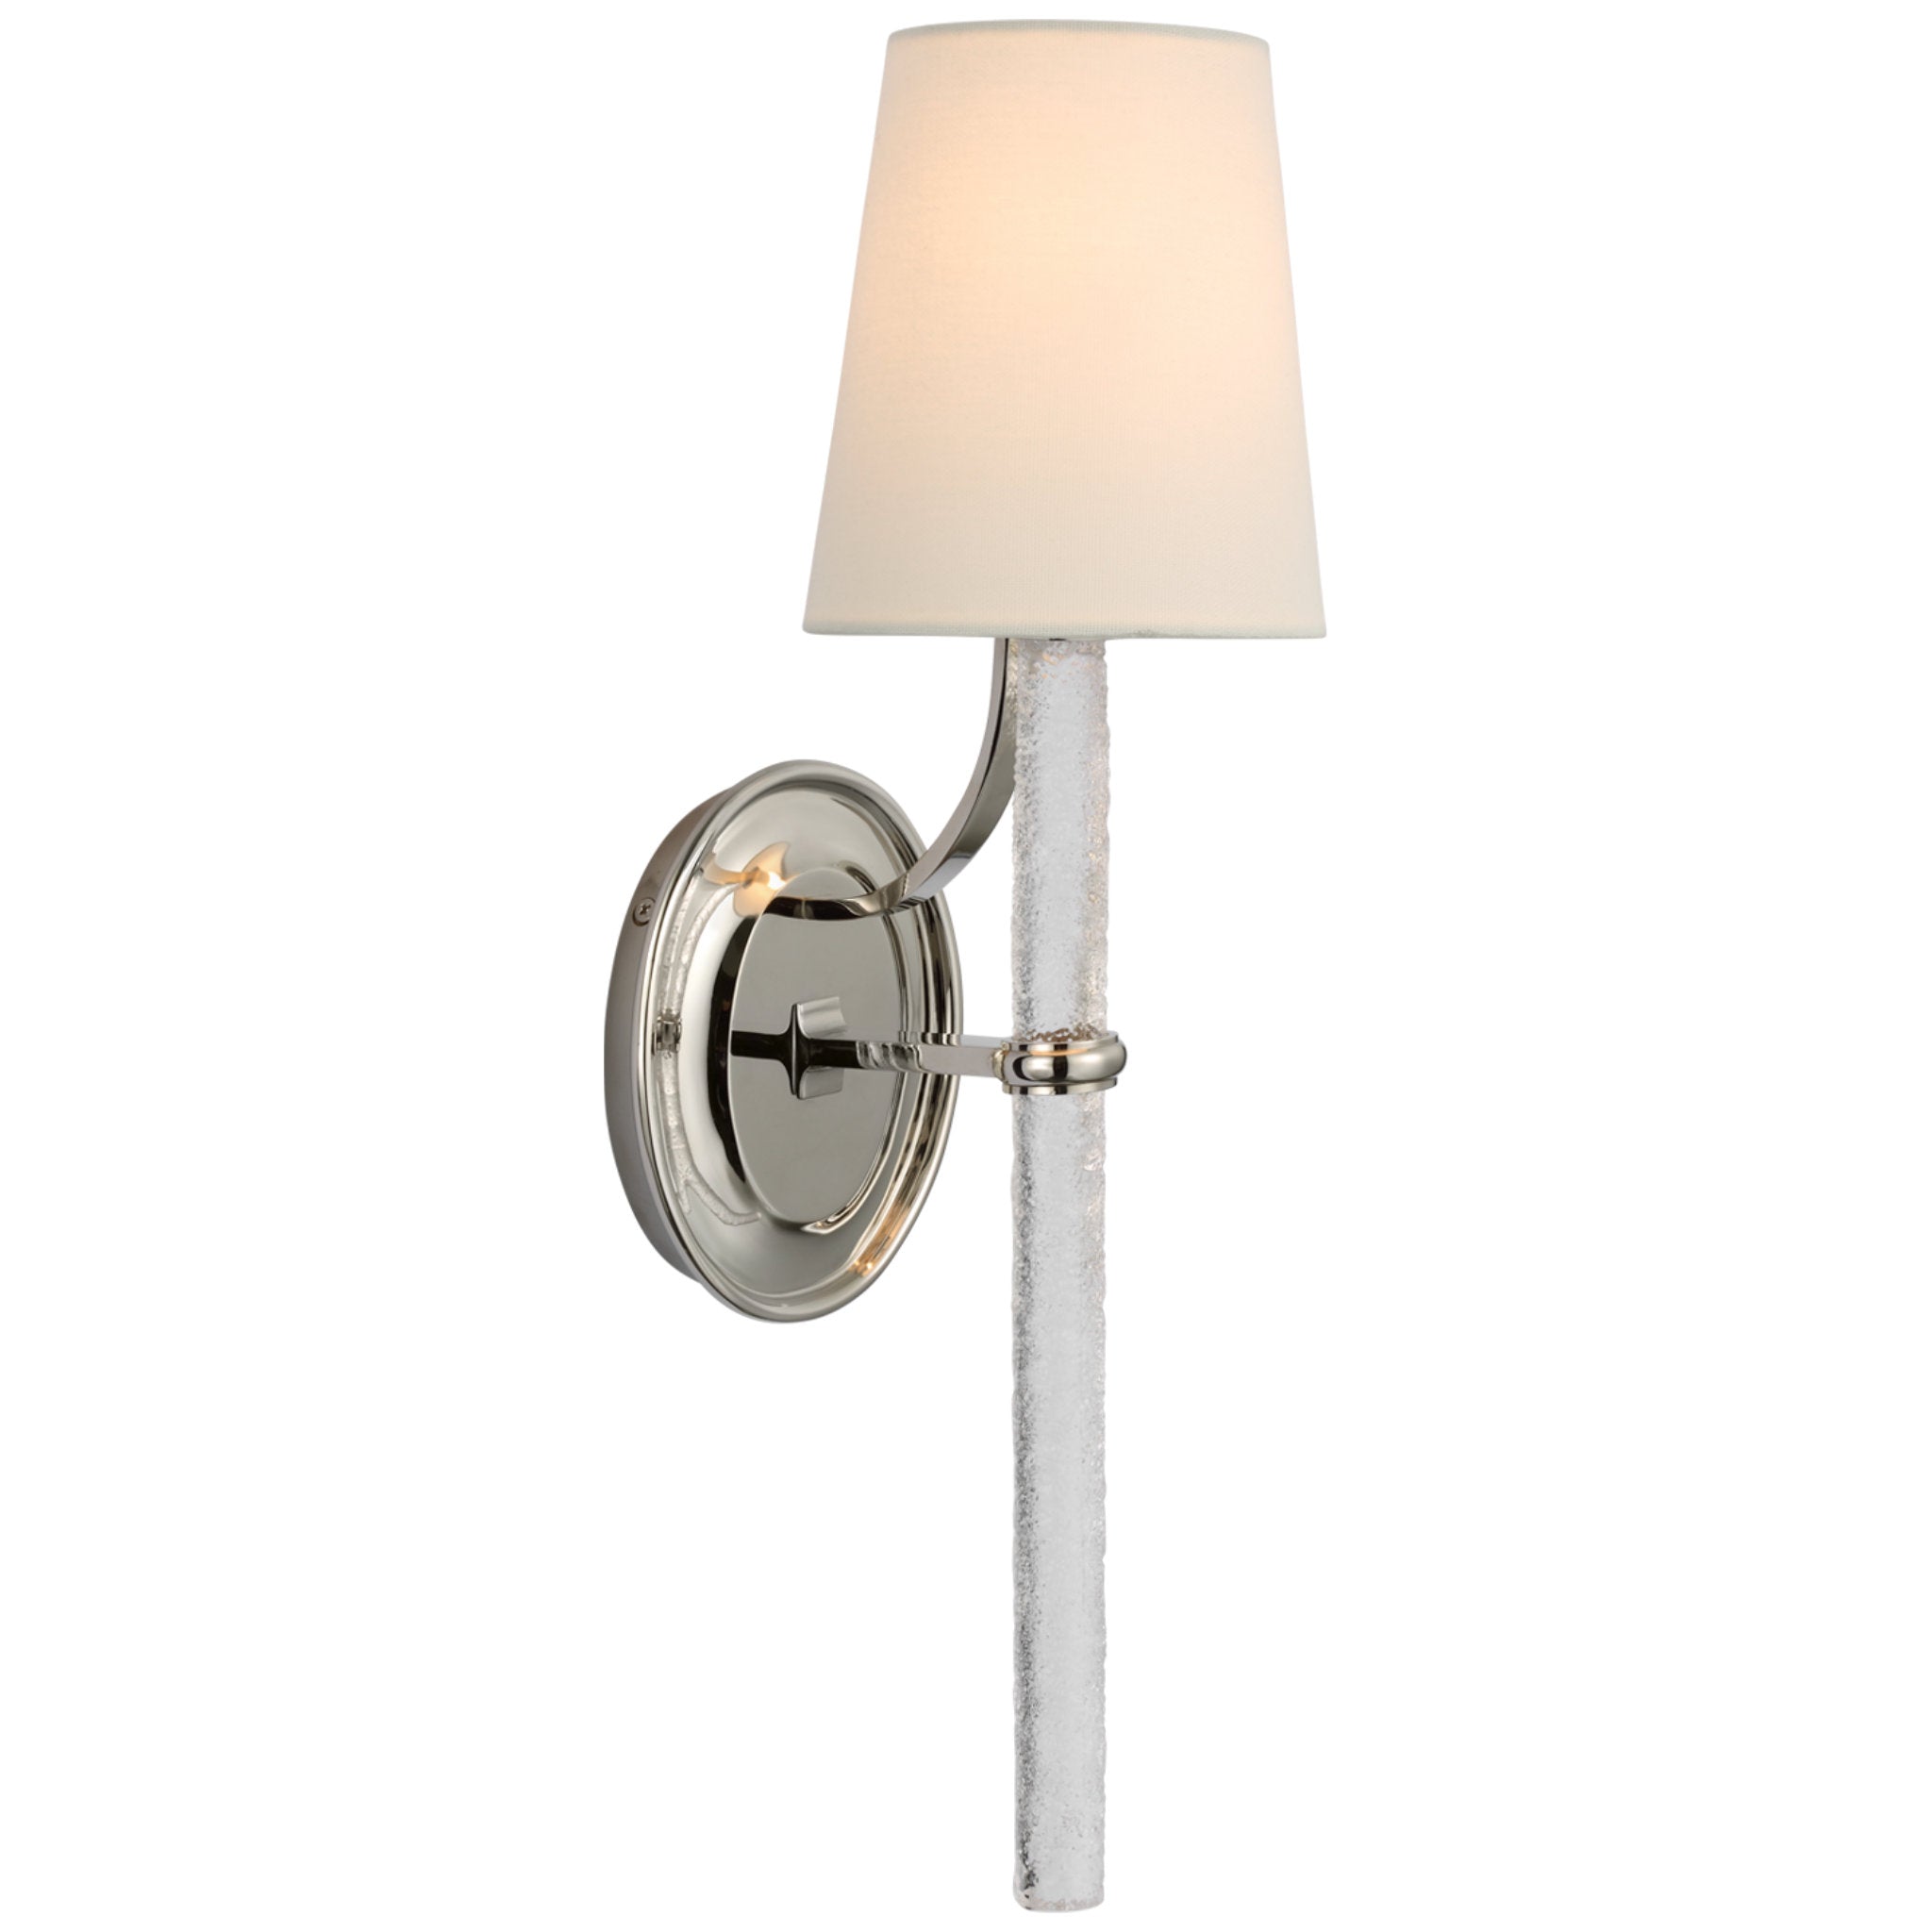 Marie Flanigan Abigail Large Sconce in Polished Nickel and Clear Wavy Glass with Linen Shade